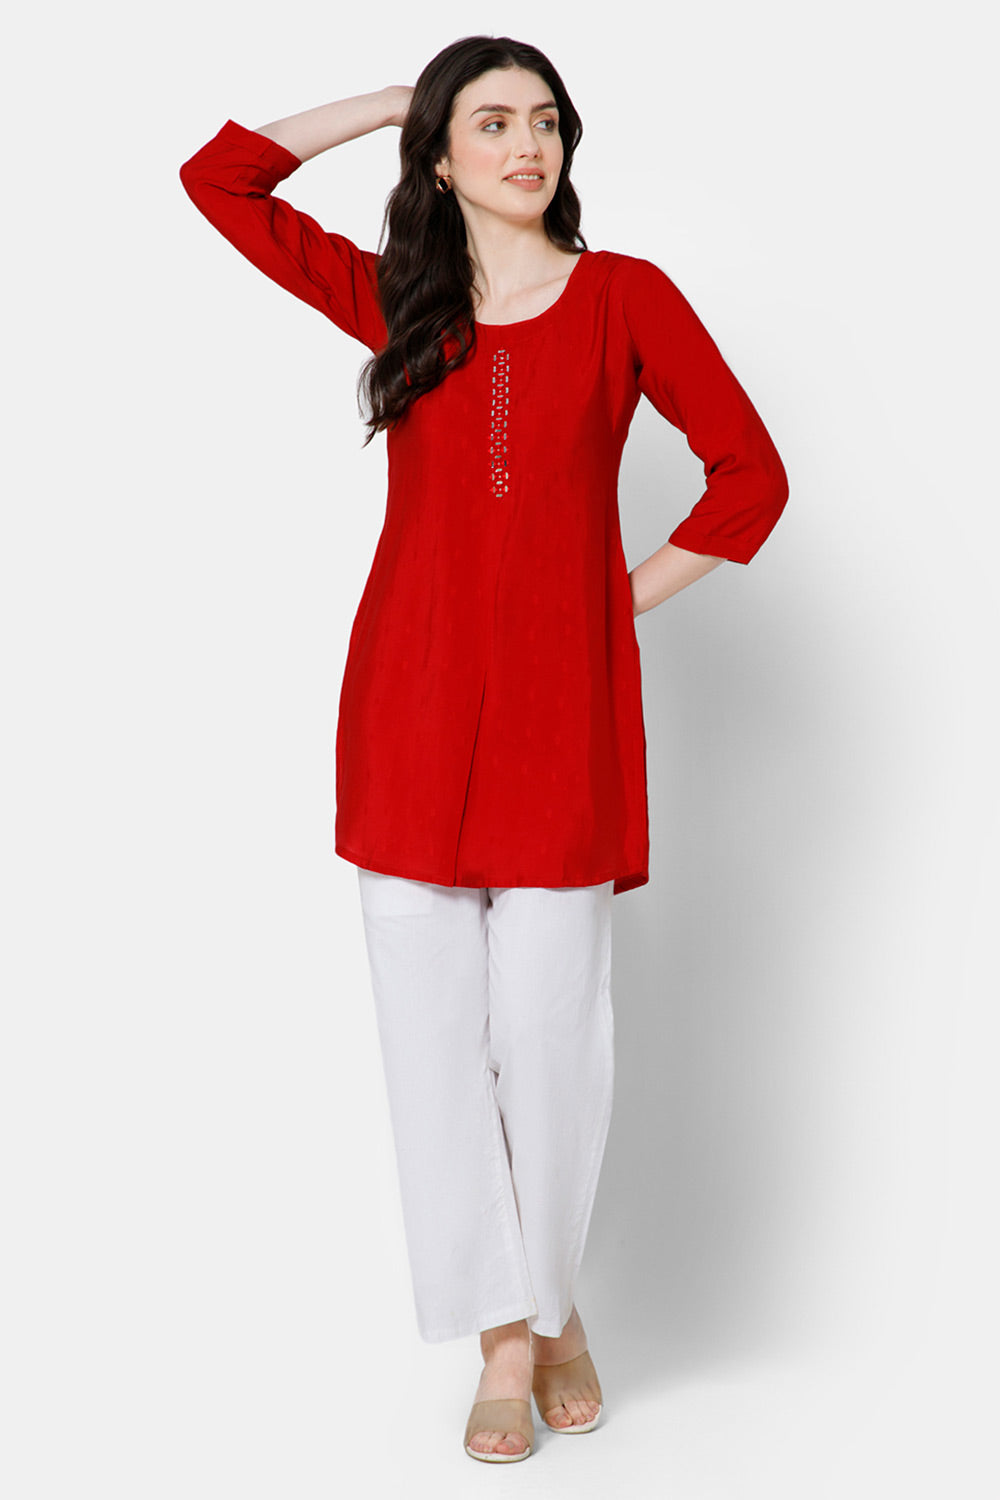 Mythri Women's Casual Tops with Mirror Work At The Center Front  - Red - E022